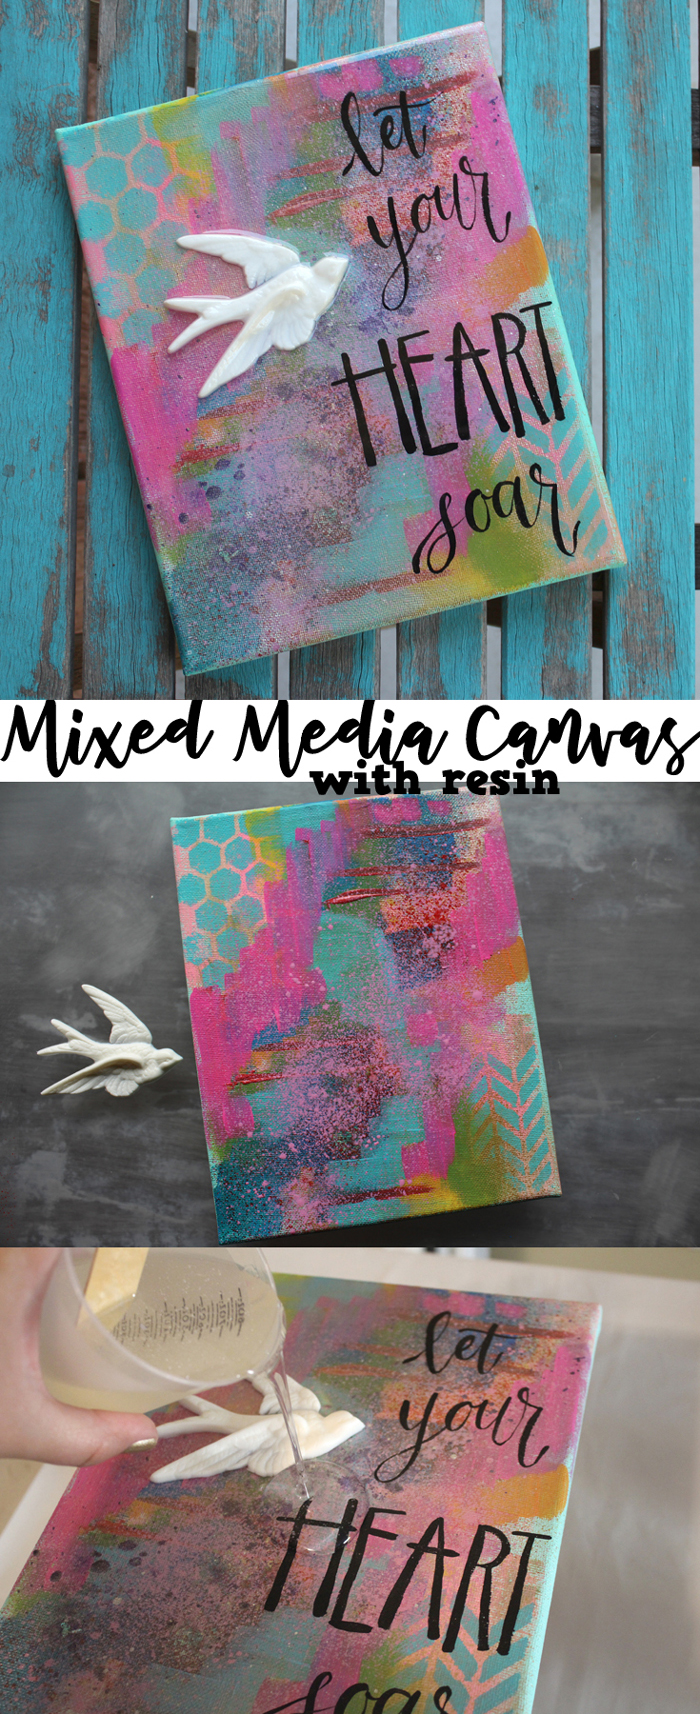 Mixed Media art is so much fun and totally in.  Adding resin to it seals the deal and makes it a work of art.  Mixed Media is just using lots of different types of media--the sky is the limit! via @resincraftsblog